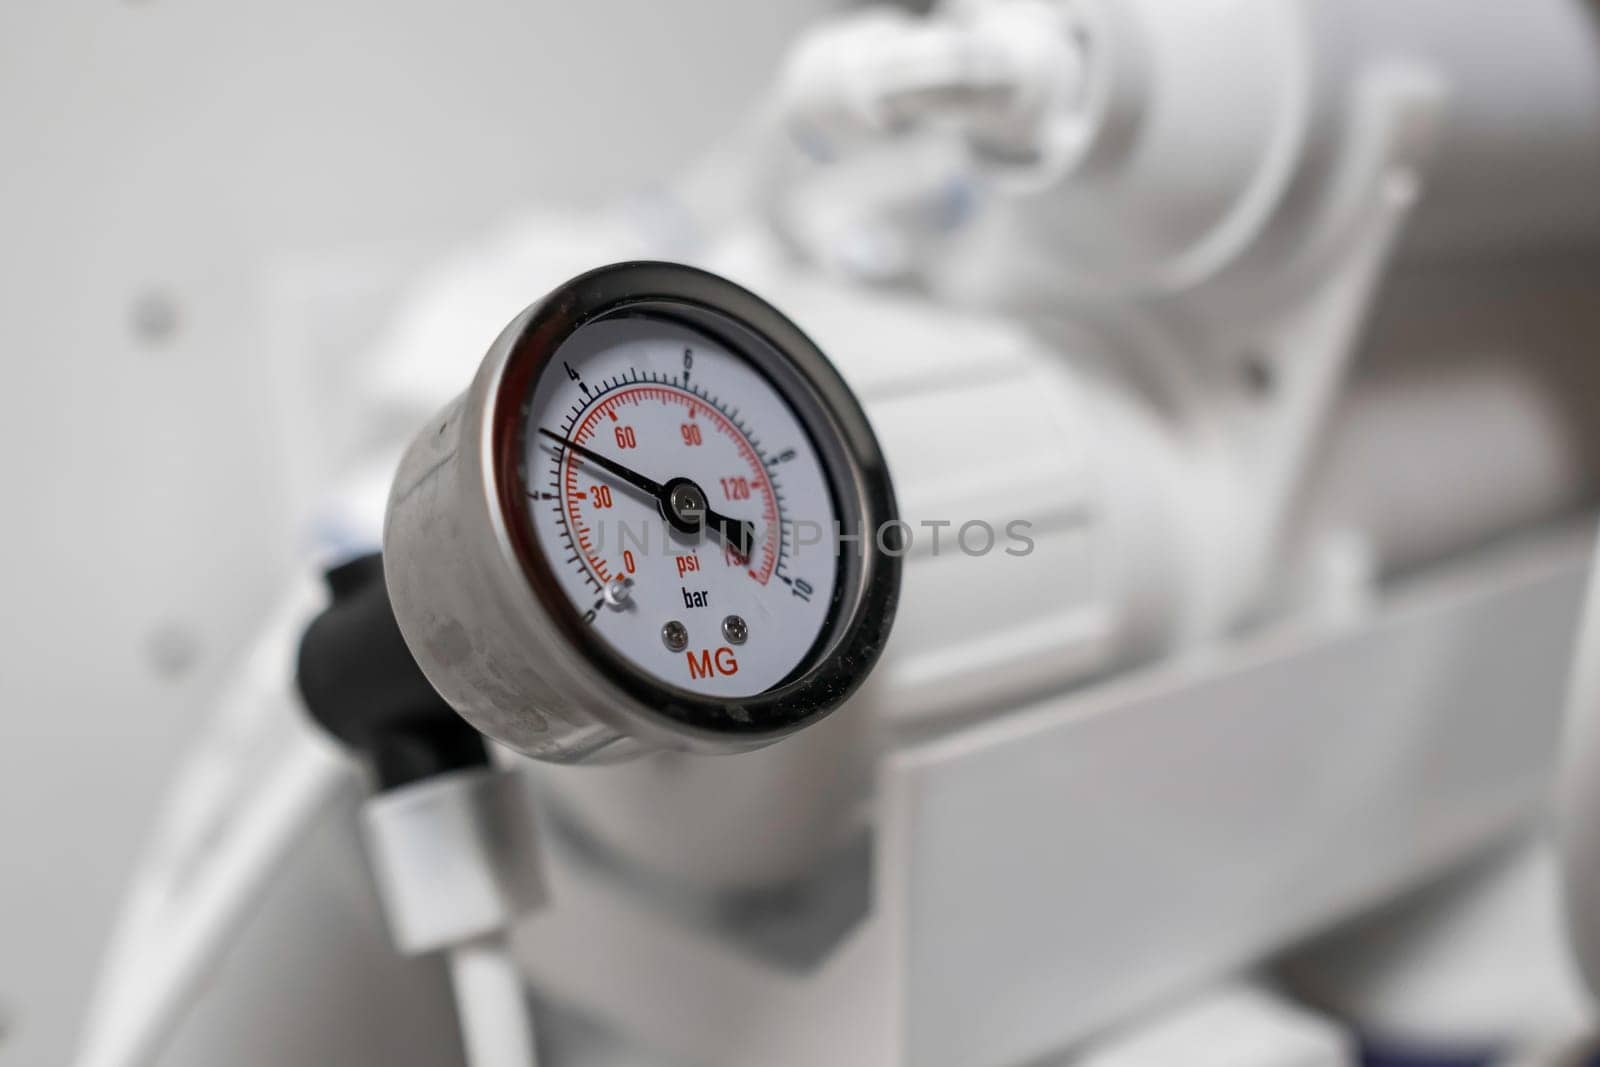 Pressure gauge shows the pressure in the reverse osmosis system.